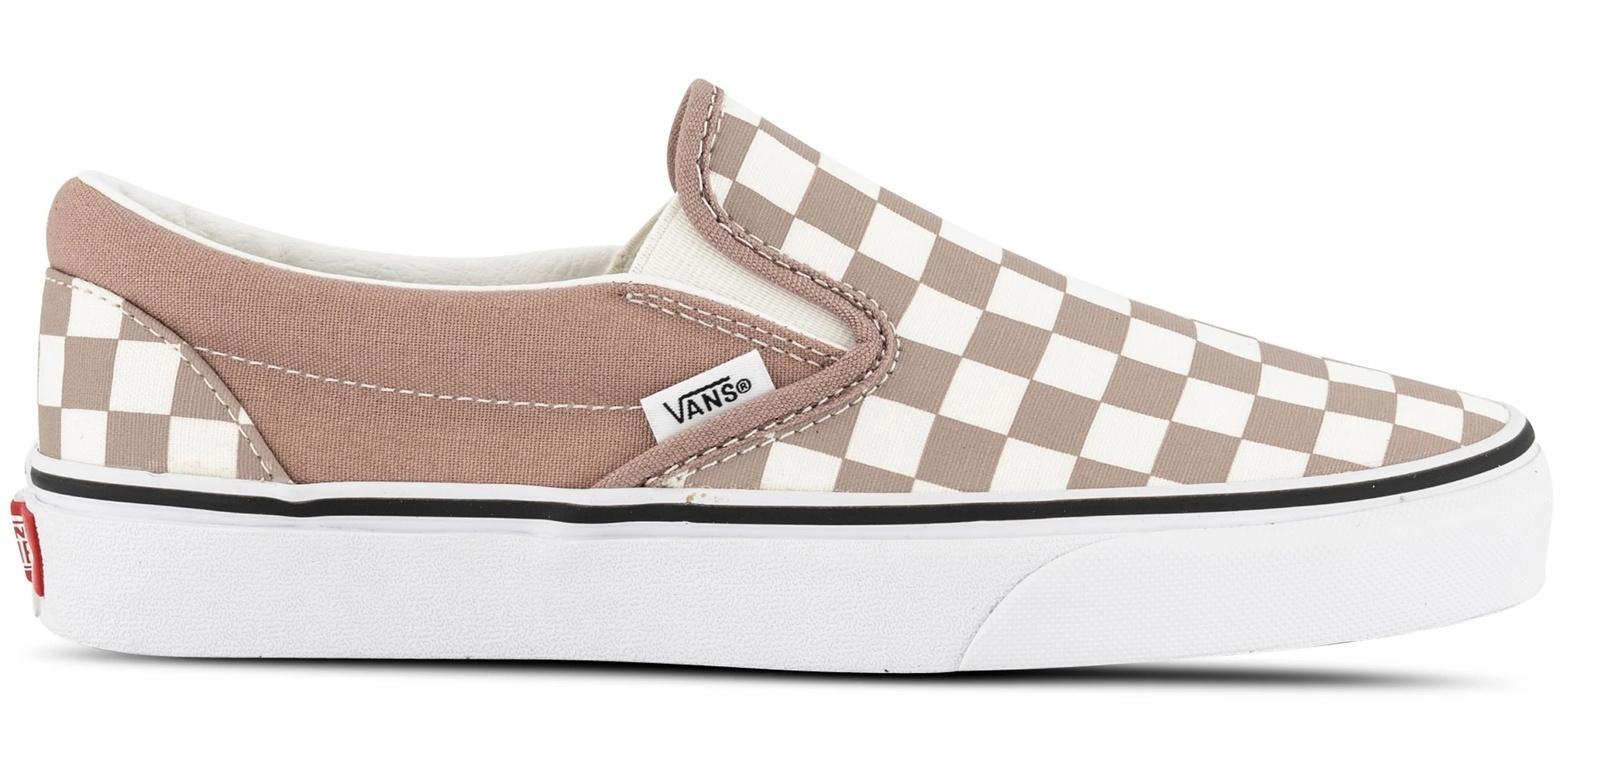 Vans Classic Slip On Canvas Sneaker Shoes Chess Check - Etherea/True White - US 13